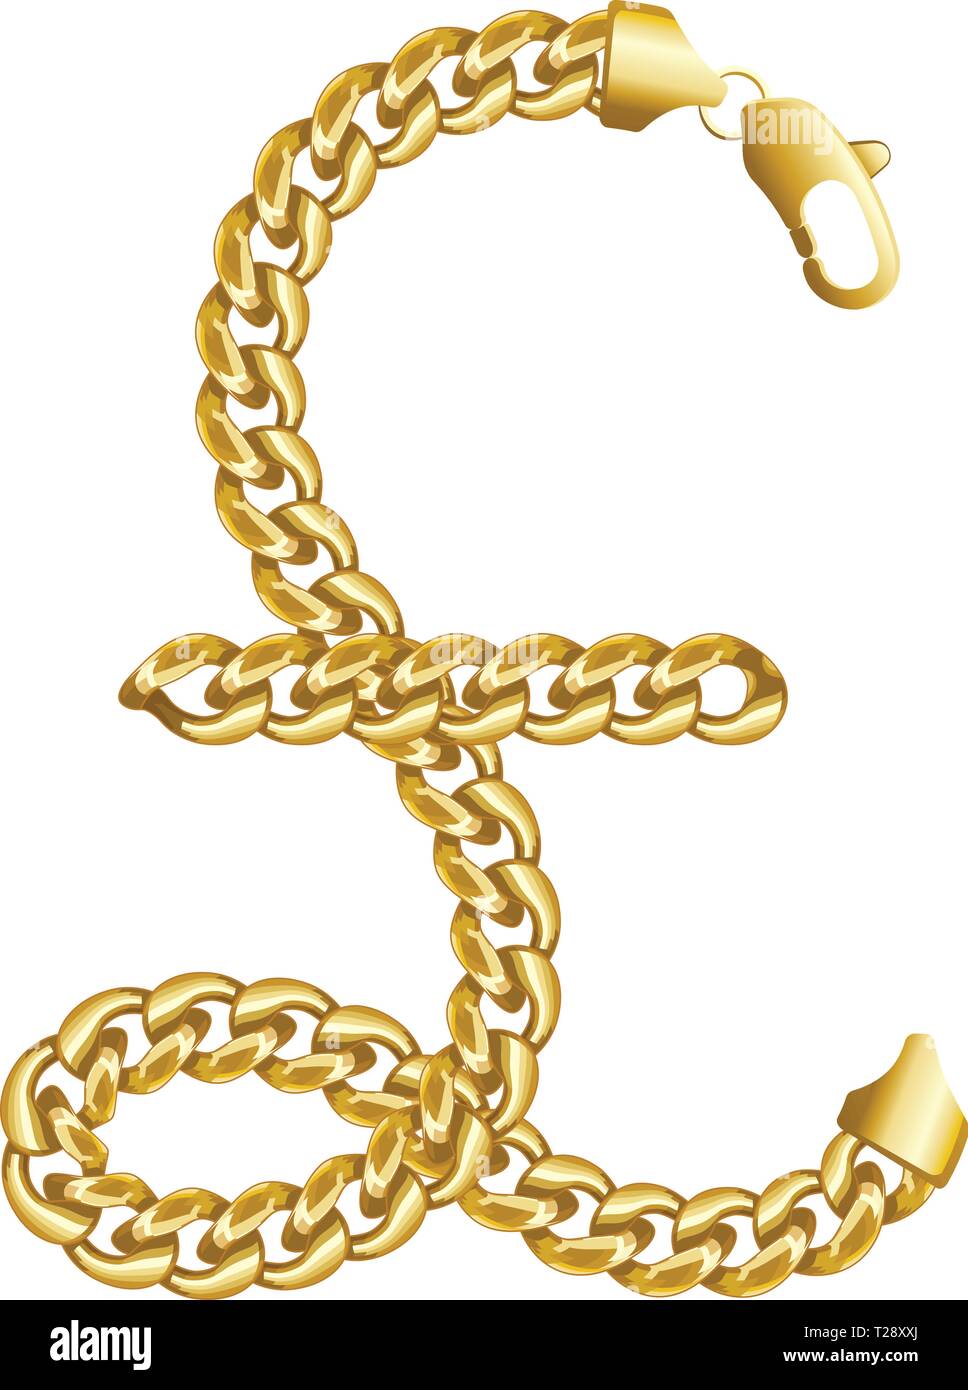 Gold pound sterling money sign made of shiny thick golden chain. Stock Vector